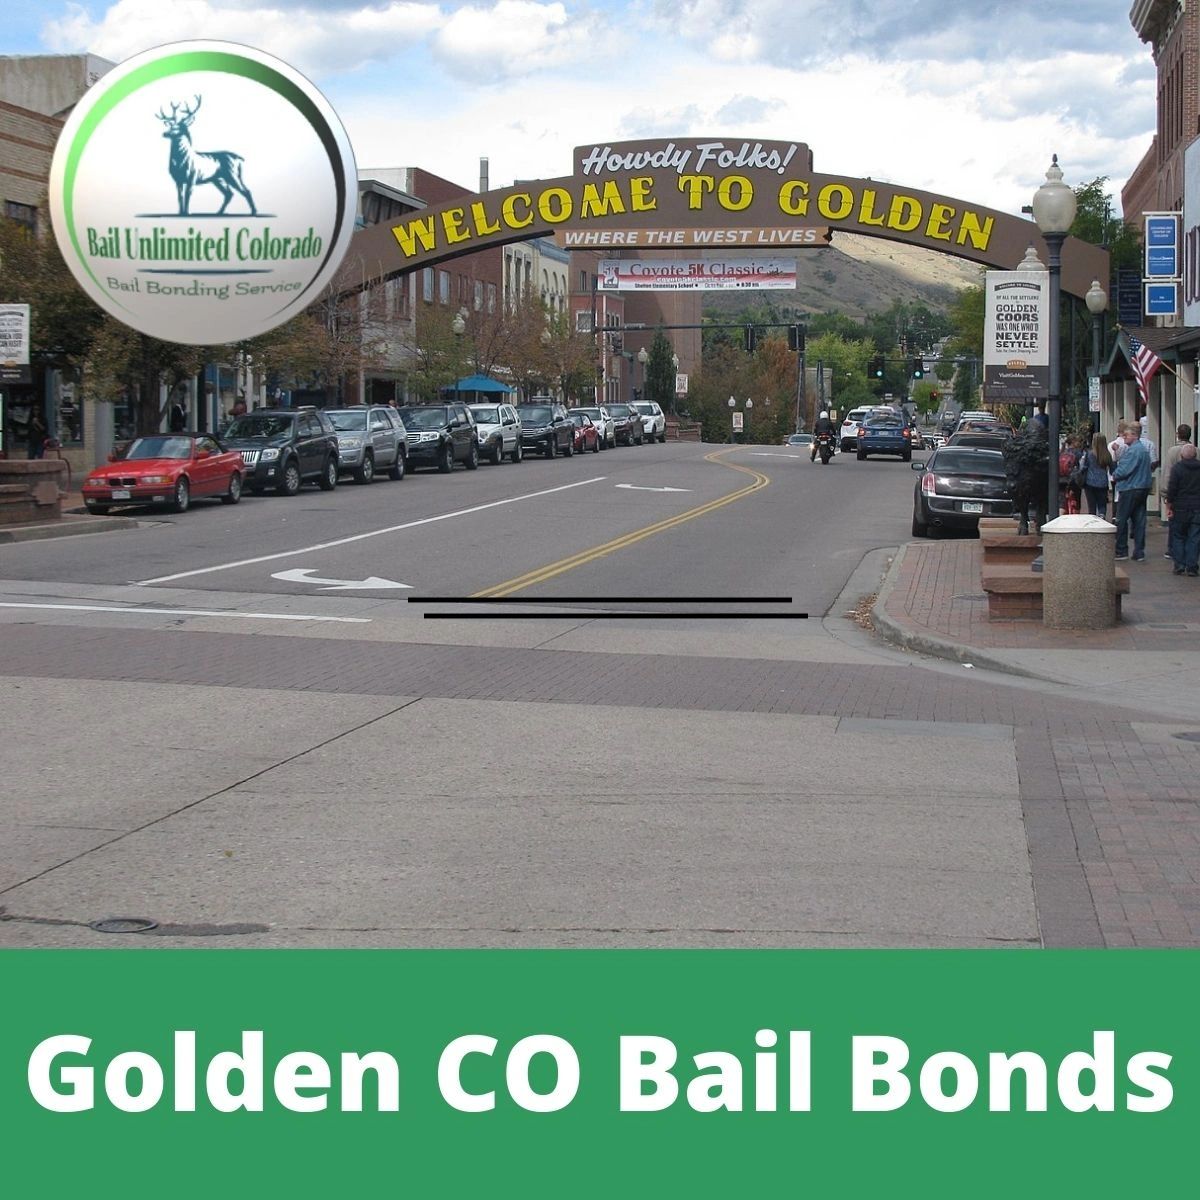 Golden CO Bail Bonds LOGO Bail Unlimited Colorado - Howdy Folks Welcome to Golden Arches Main Street